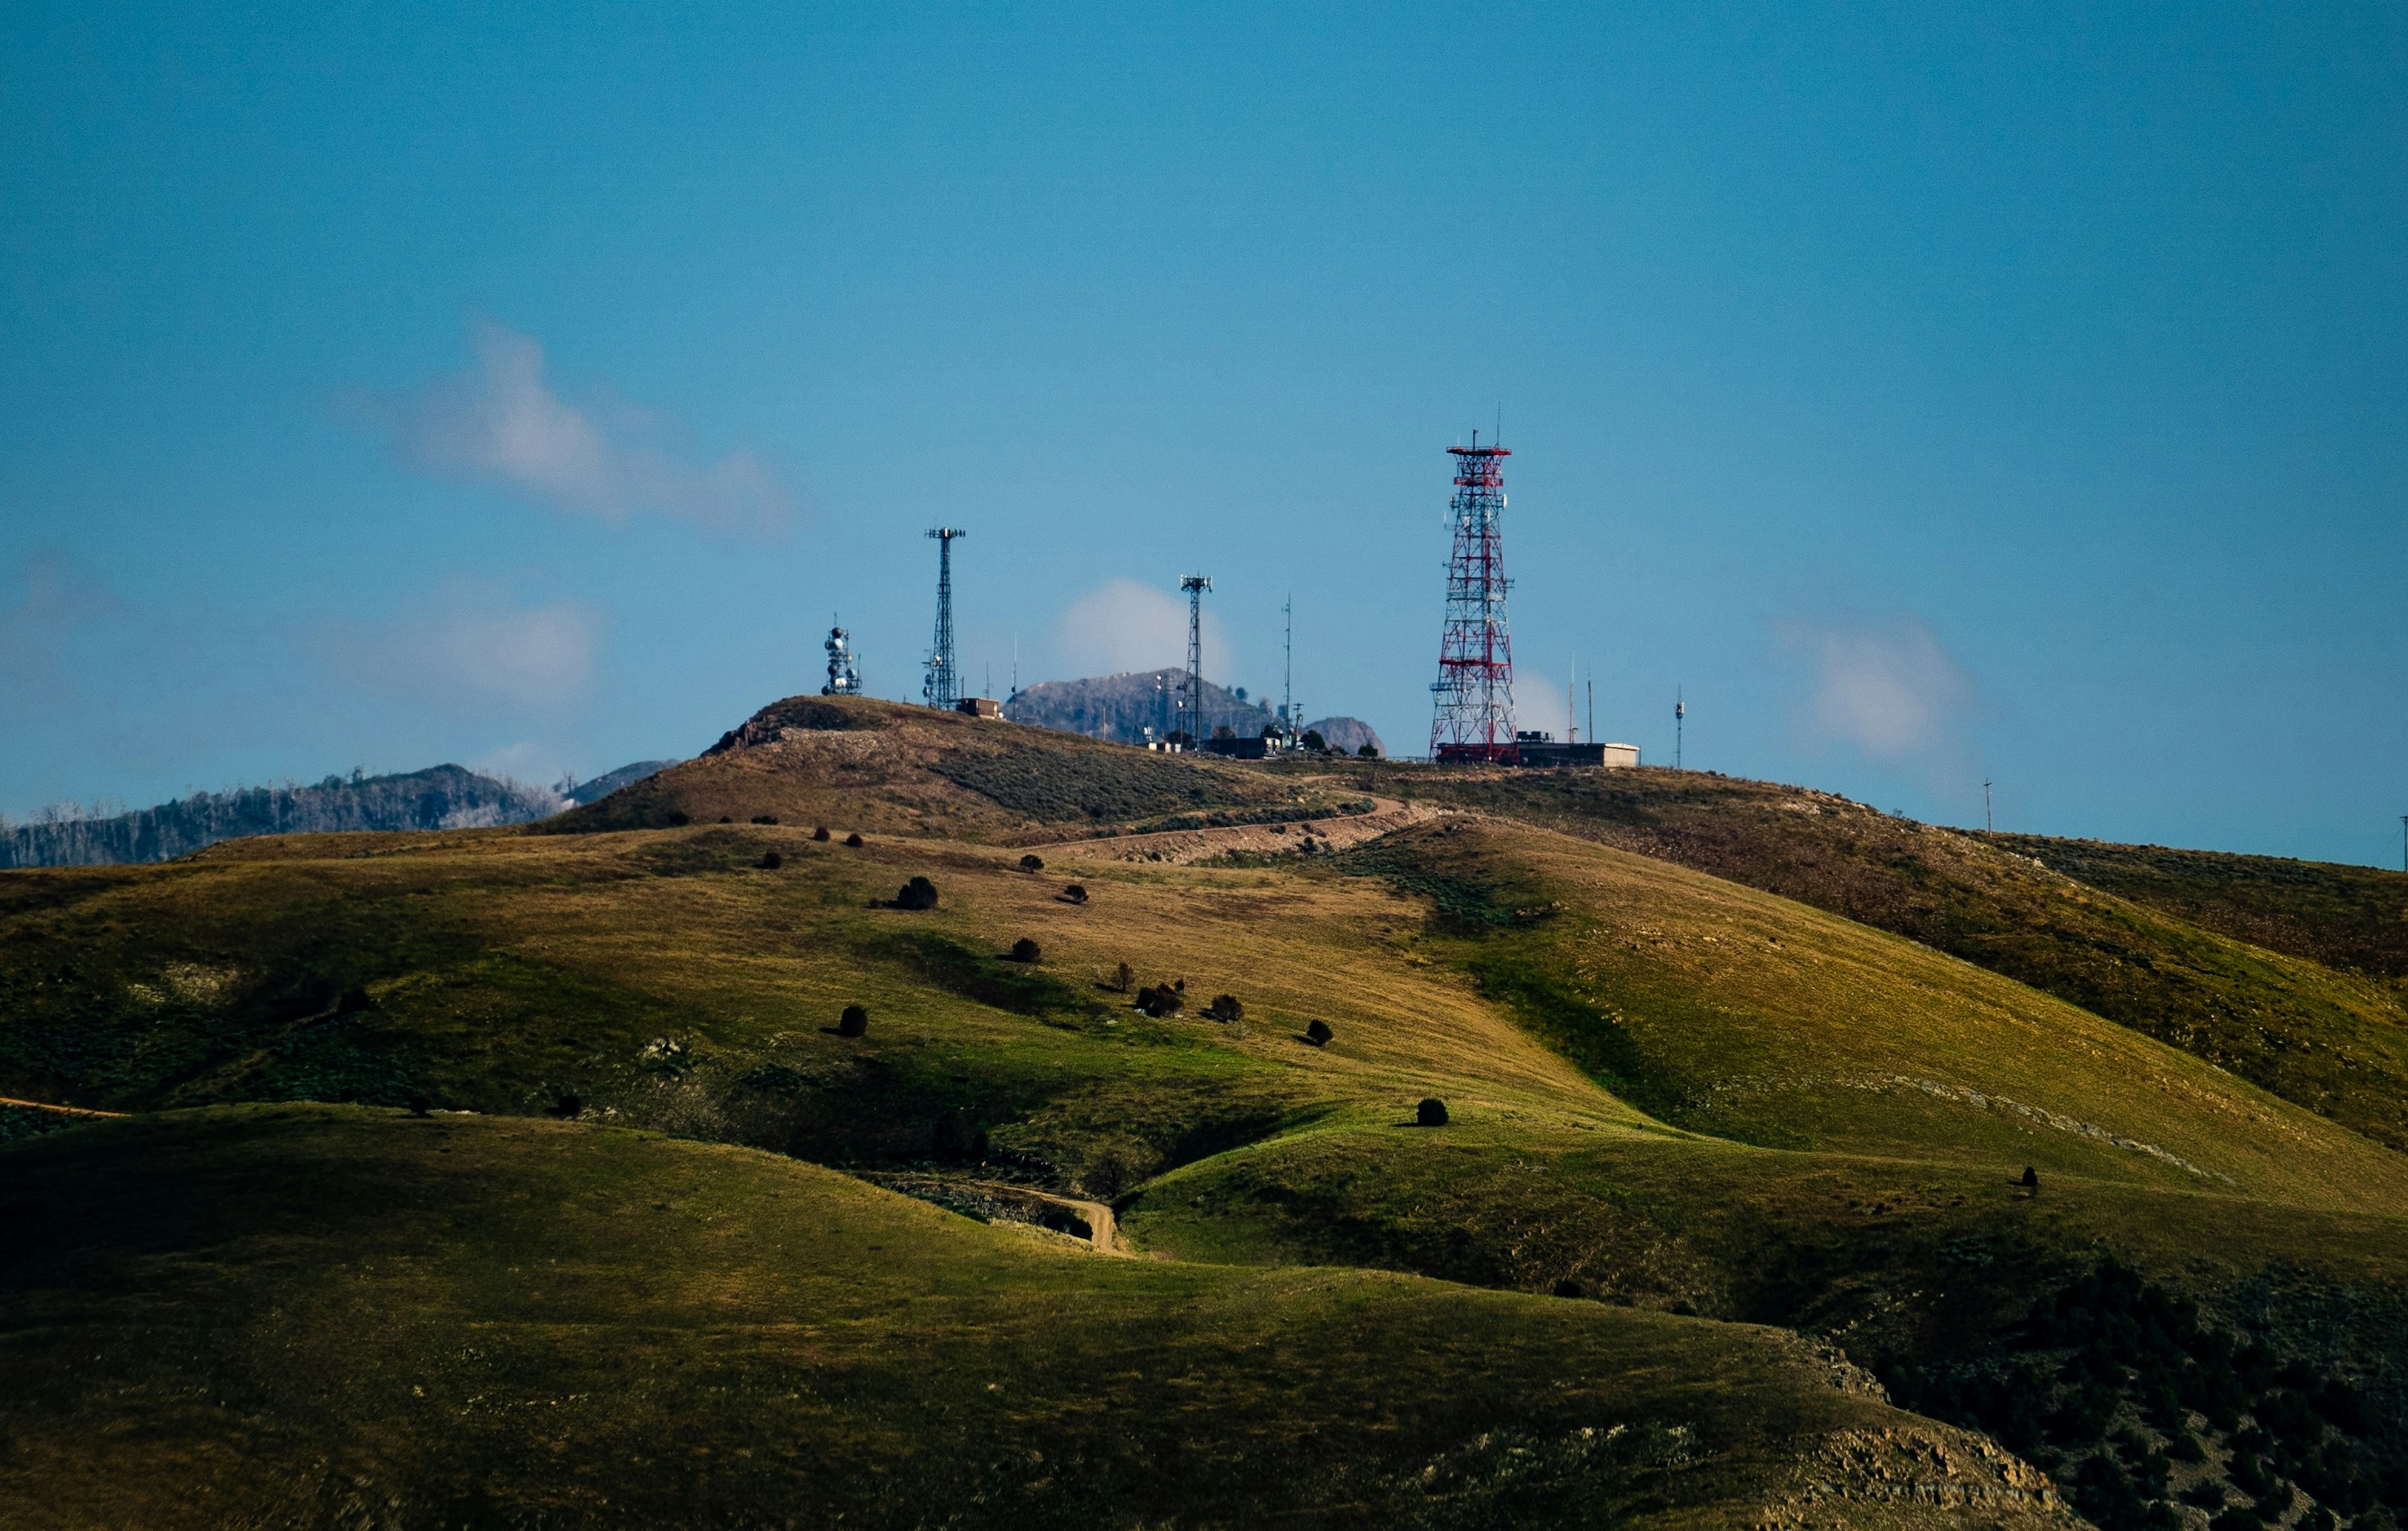 Cell towers on a hill